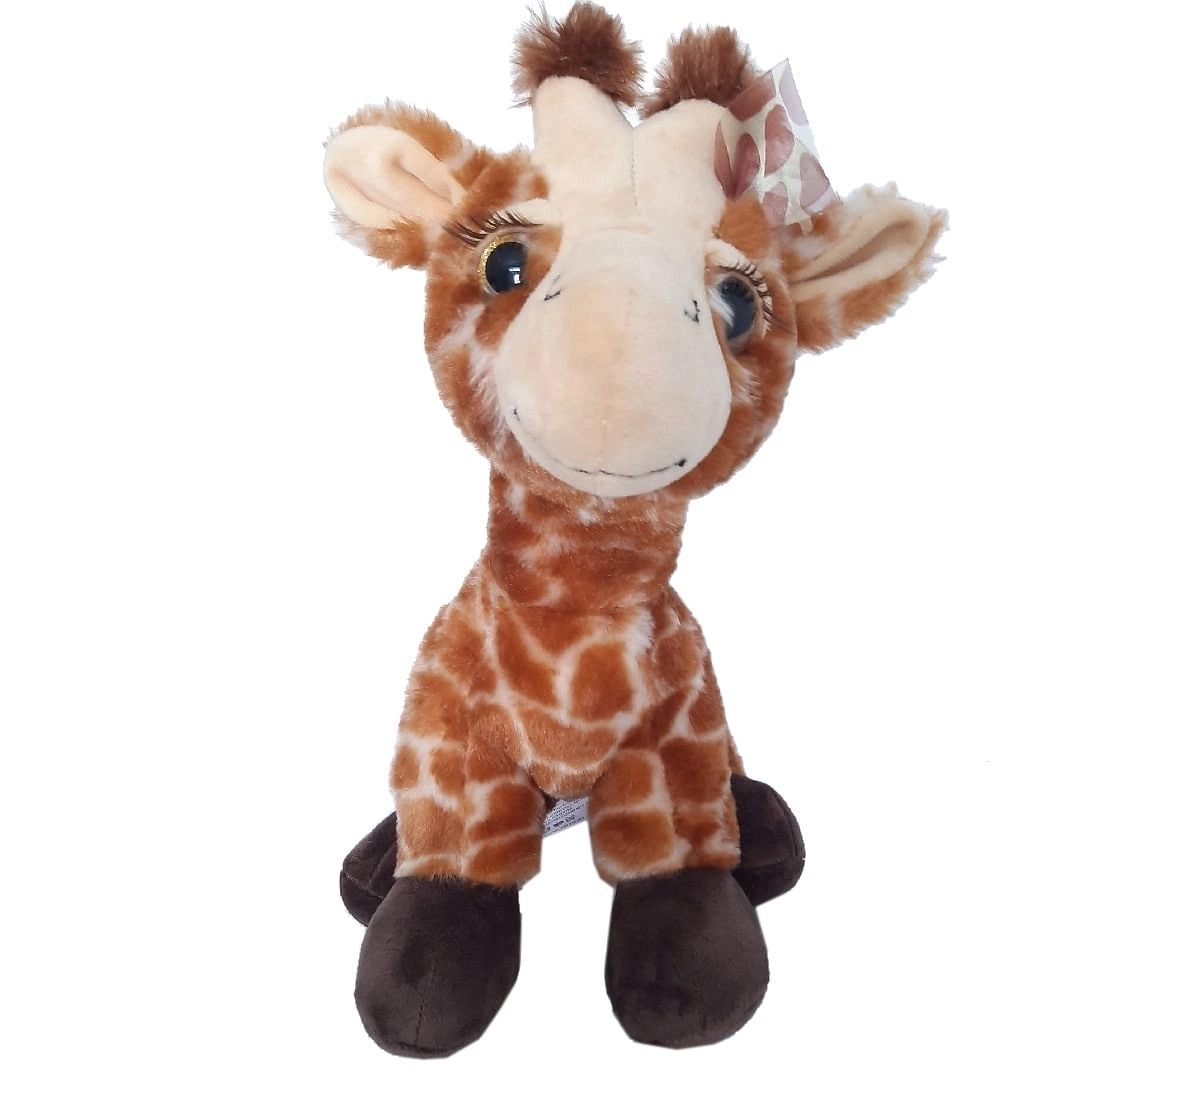 Giraffe Plush Toy - Giggles Party Store